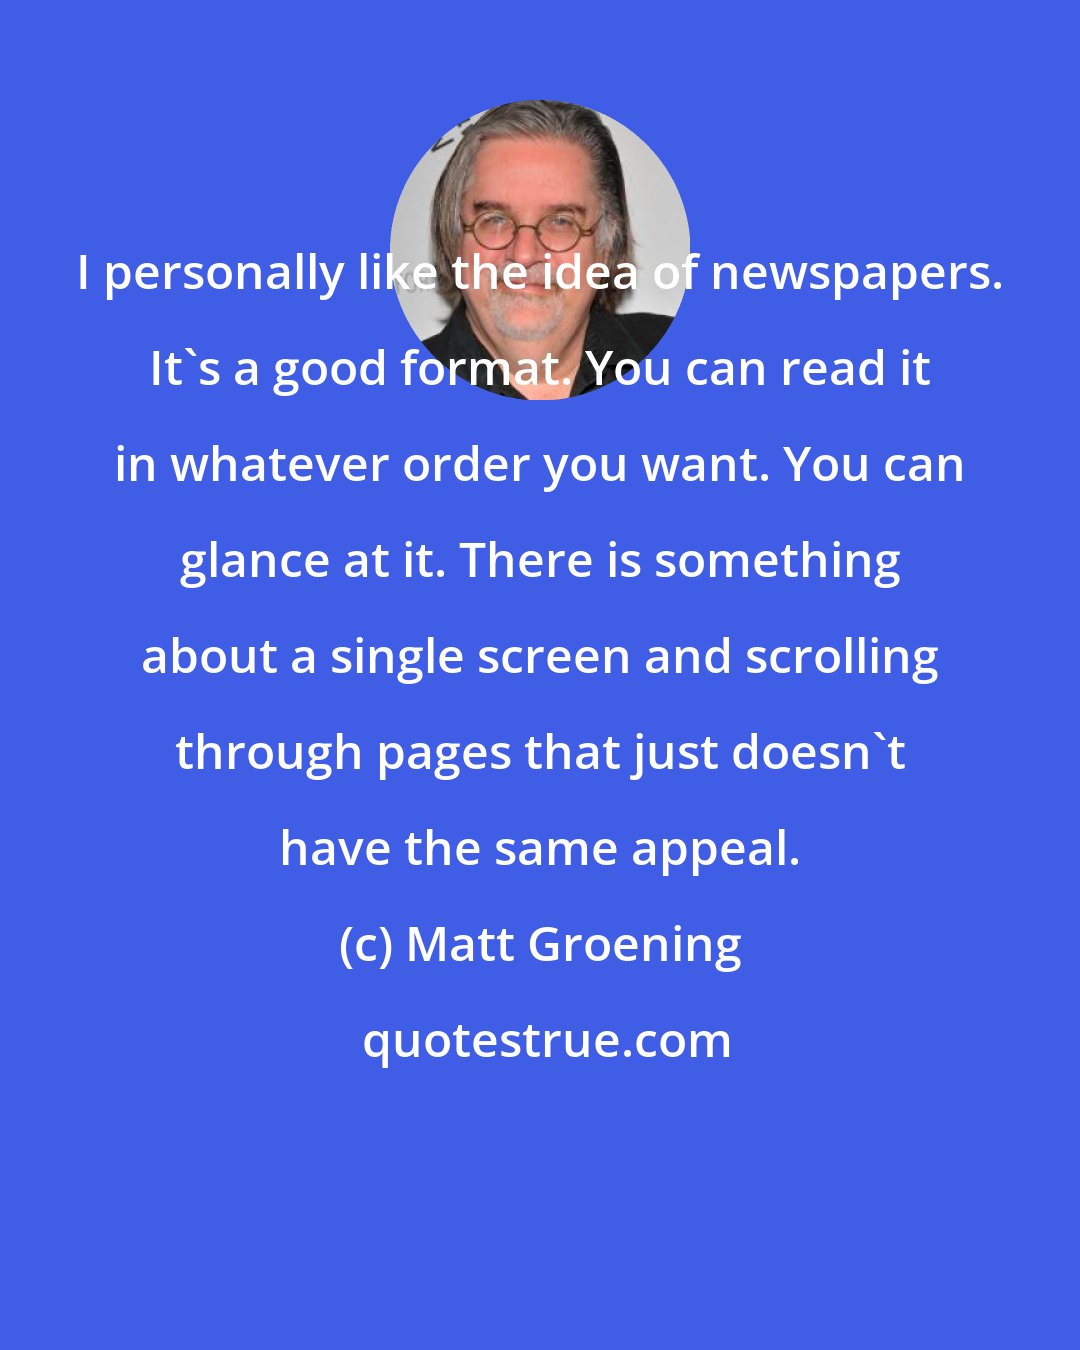 Matt Groening: I personally like the idea of newspapers. It's a good format. You can read it in whatever order you want. You can glance at it. There is something about a single screen and scrolling through pages that just doesn't have the same appeal.